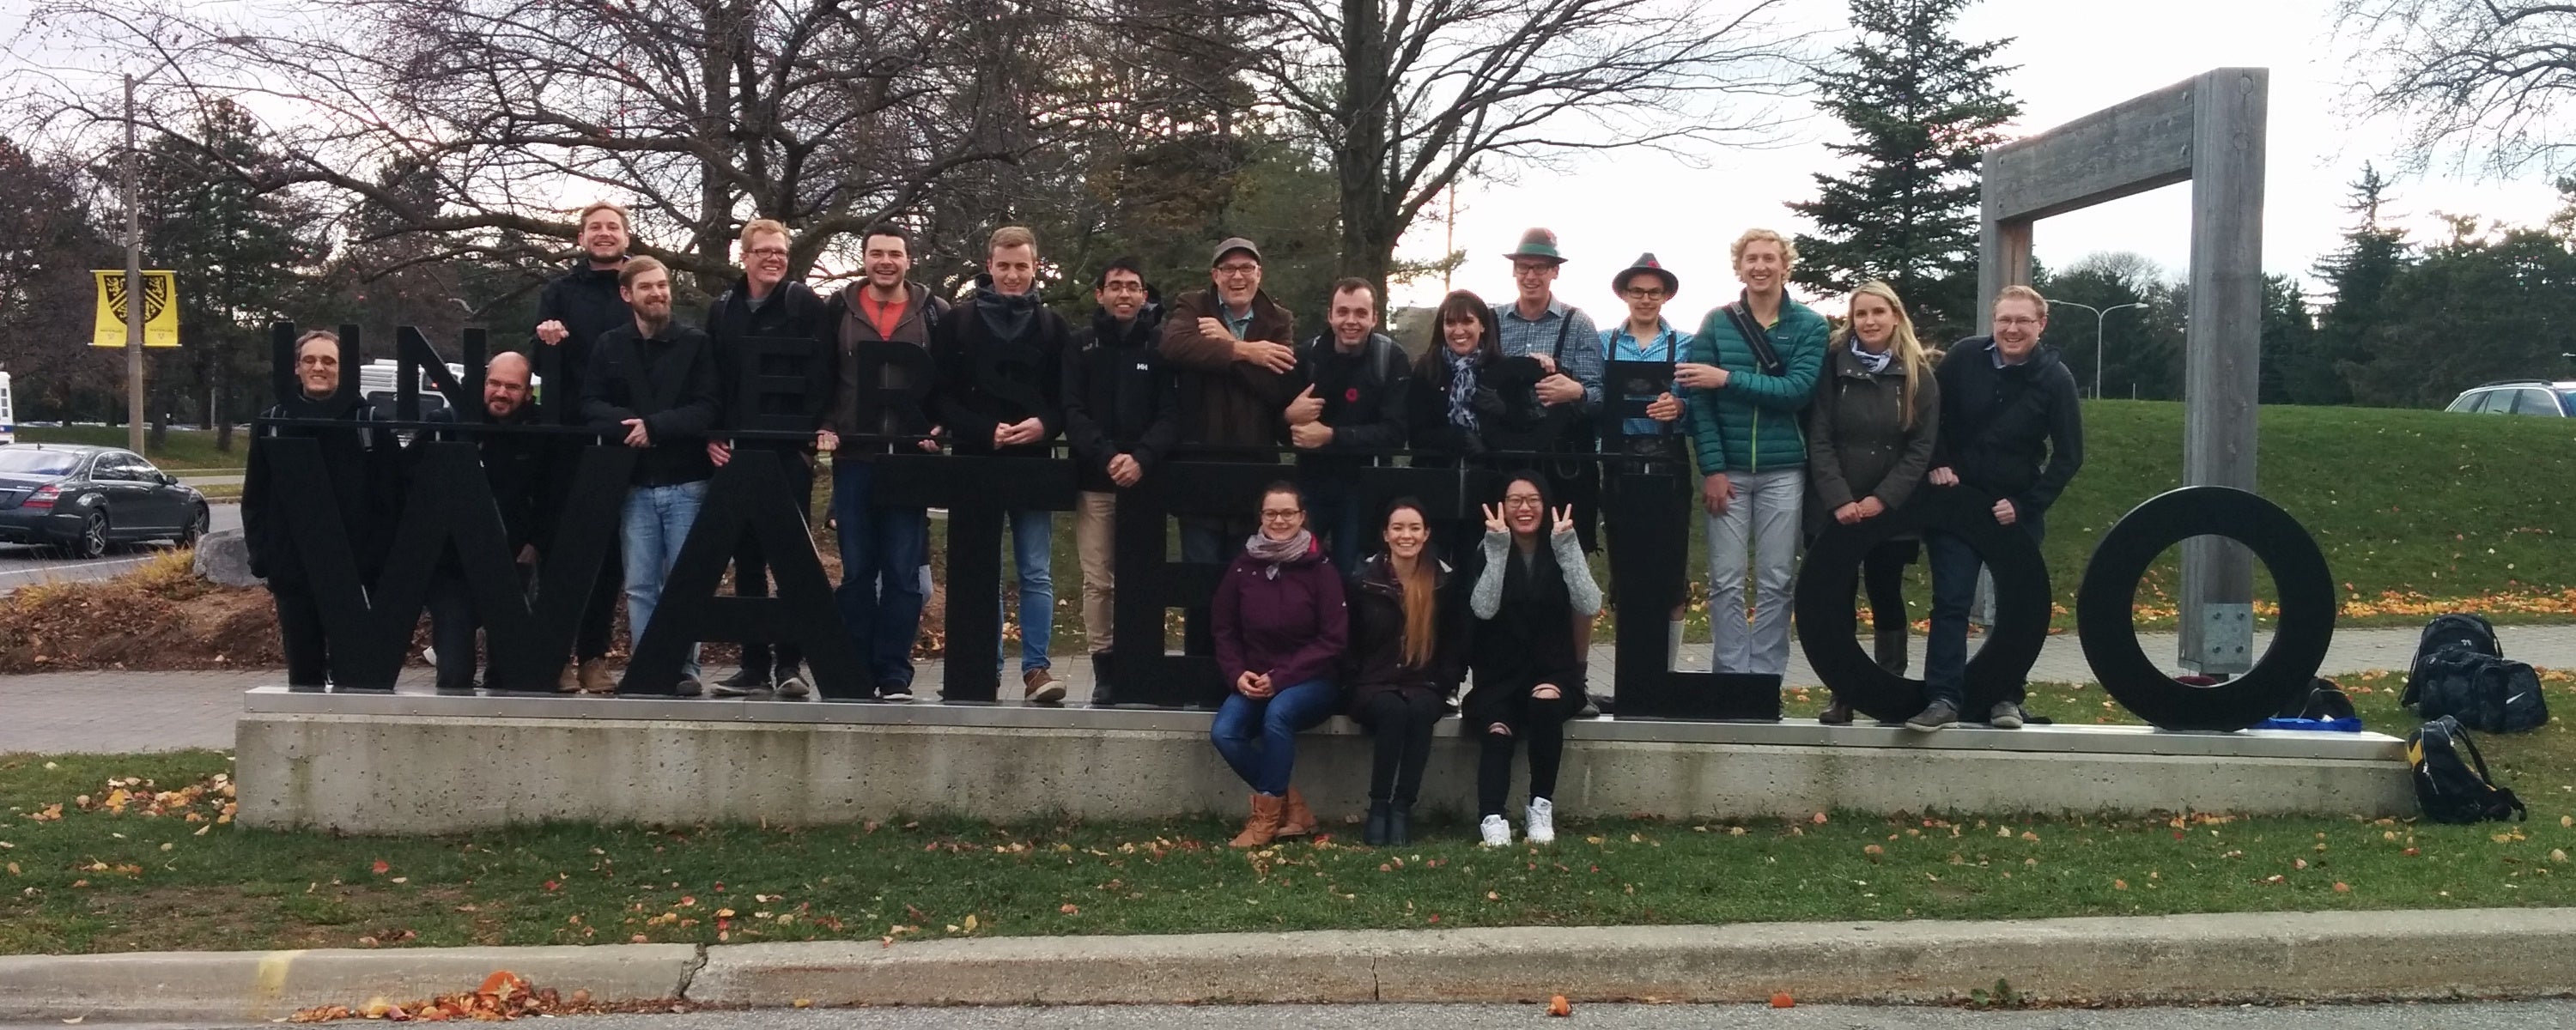 German and Canadian students in Waterloo, 2016